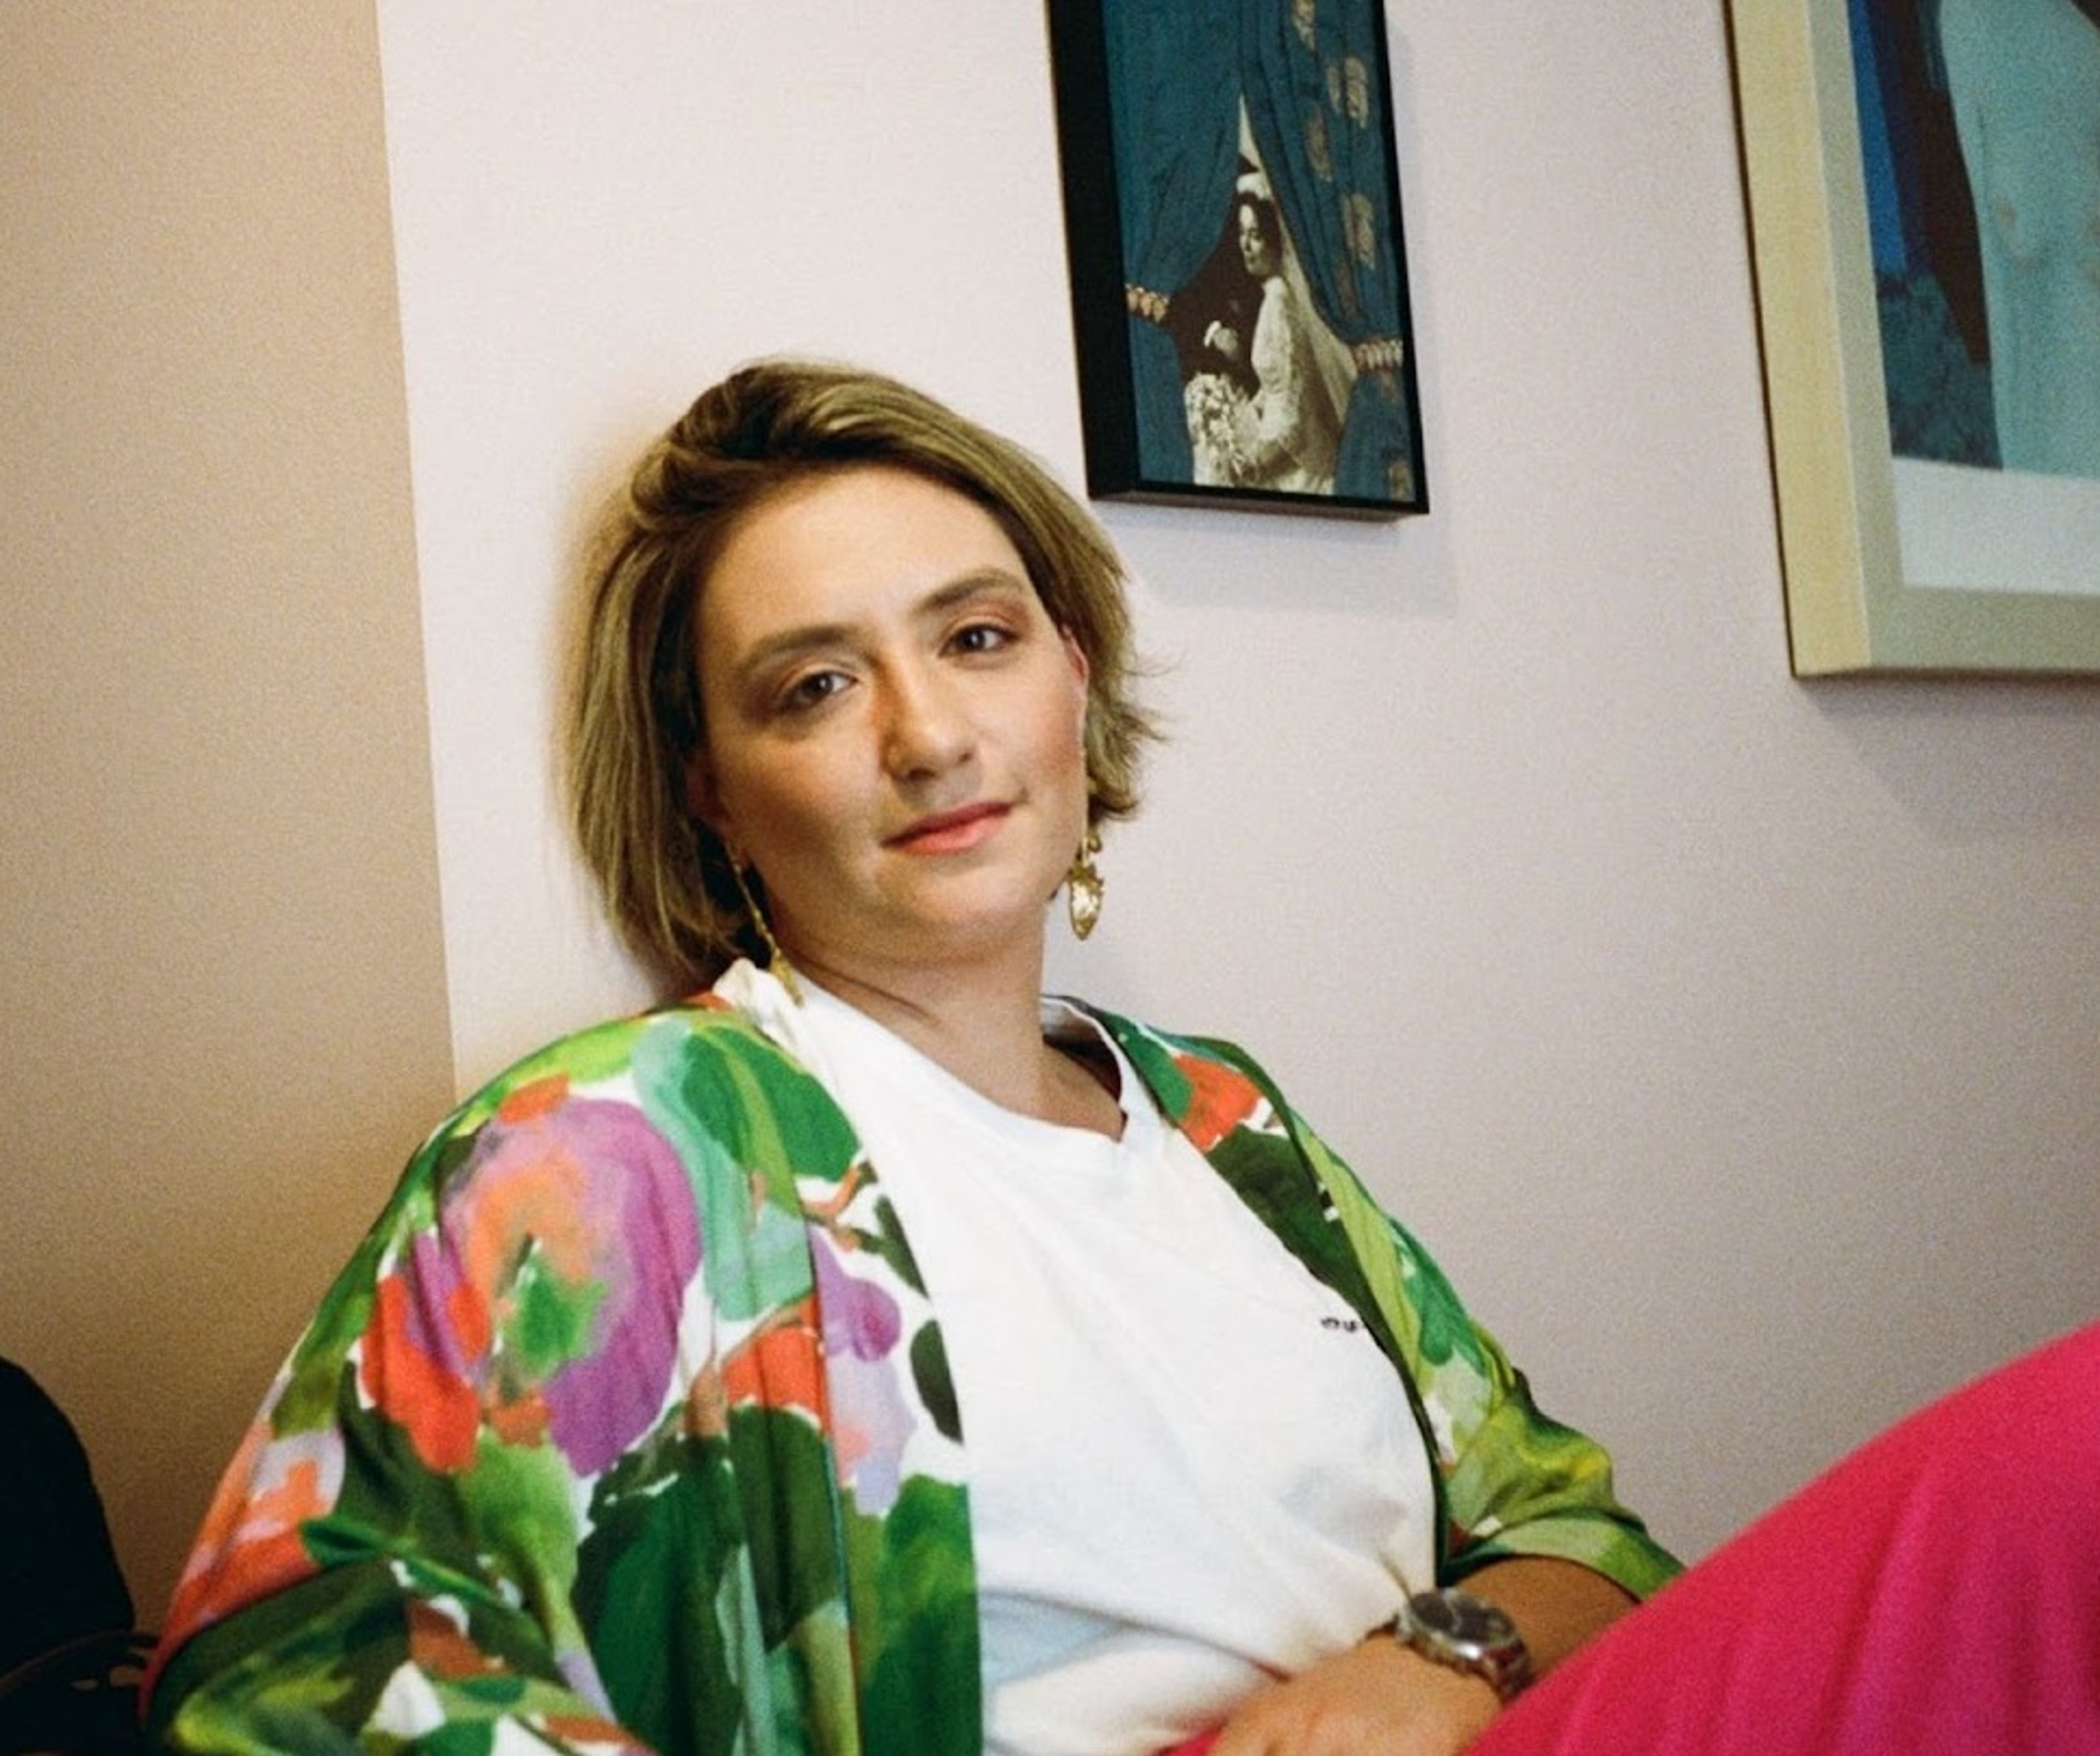 Huma Kabakcı sitting in front of beige wall with green painting, wearing floral shirt.